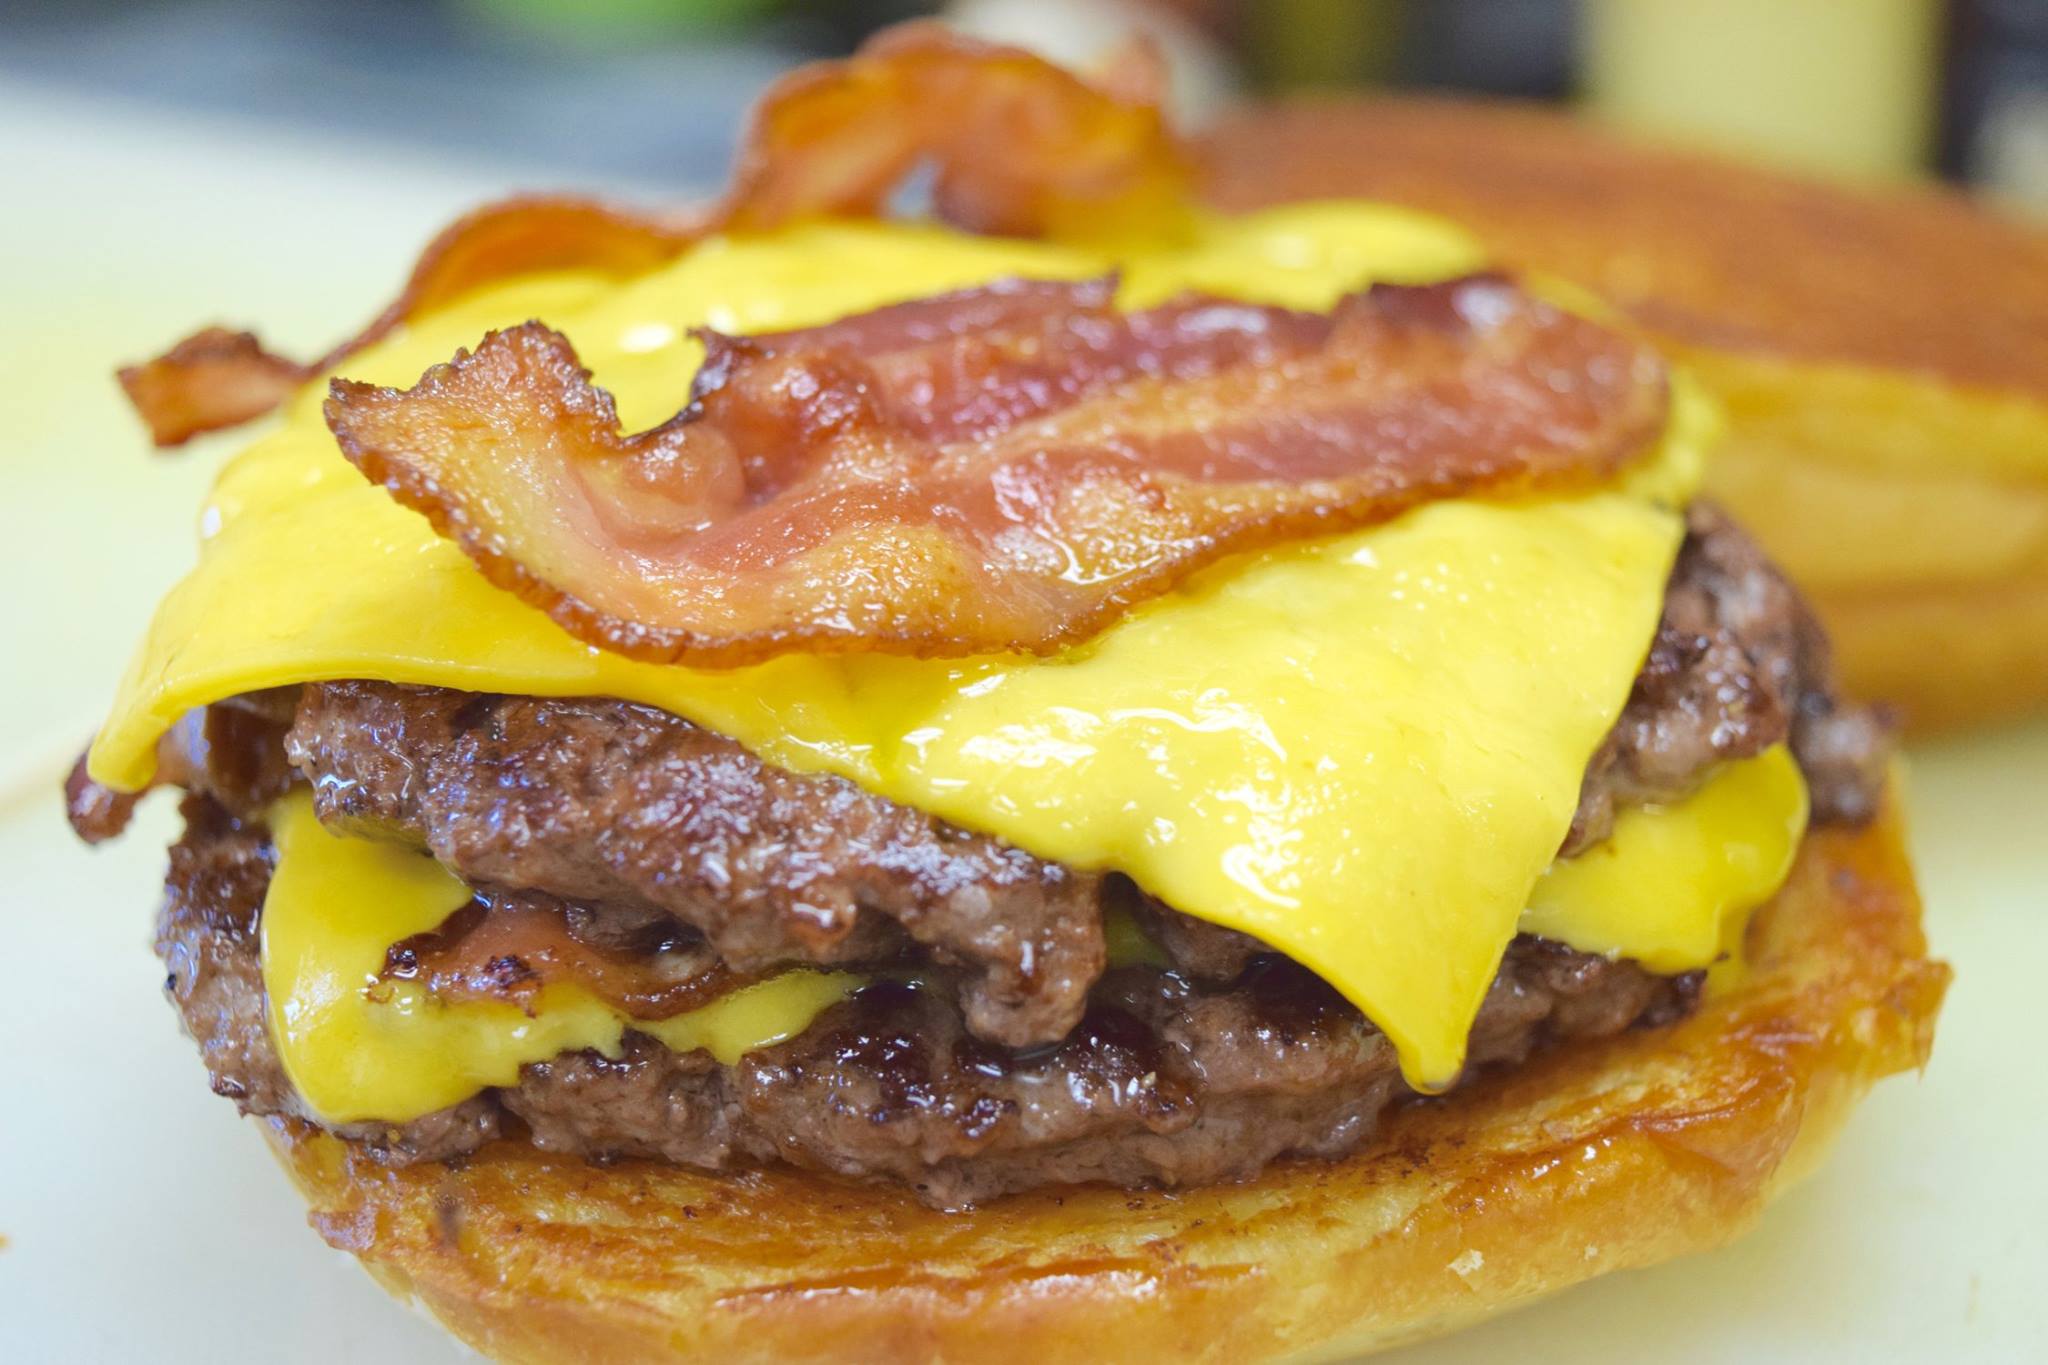 A bacon double cheese burger from Bogey's Burgers.